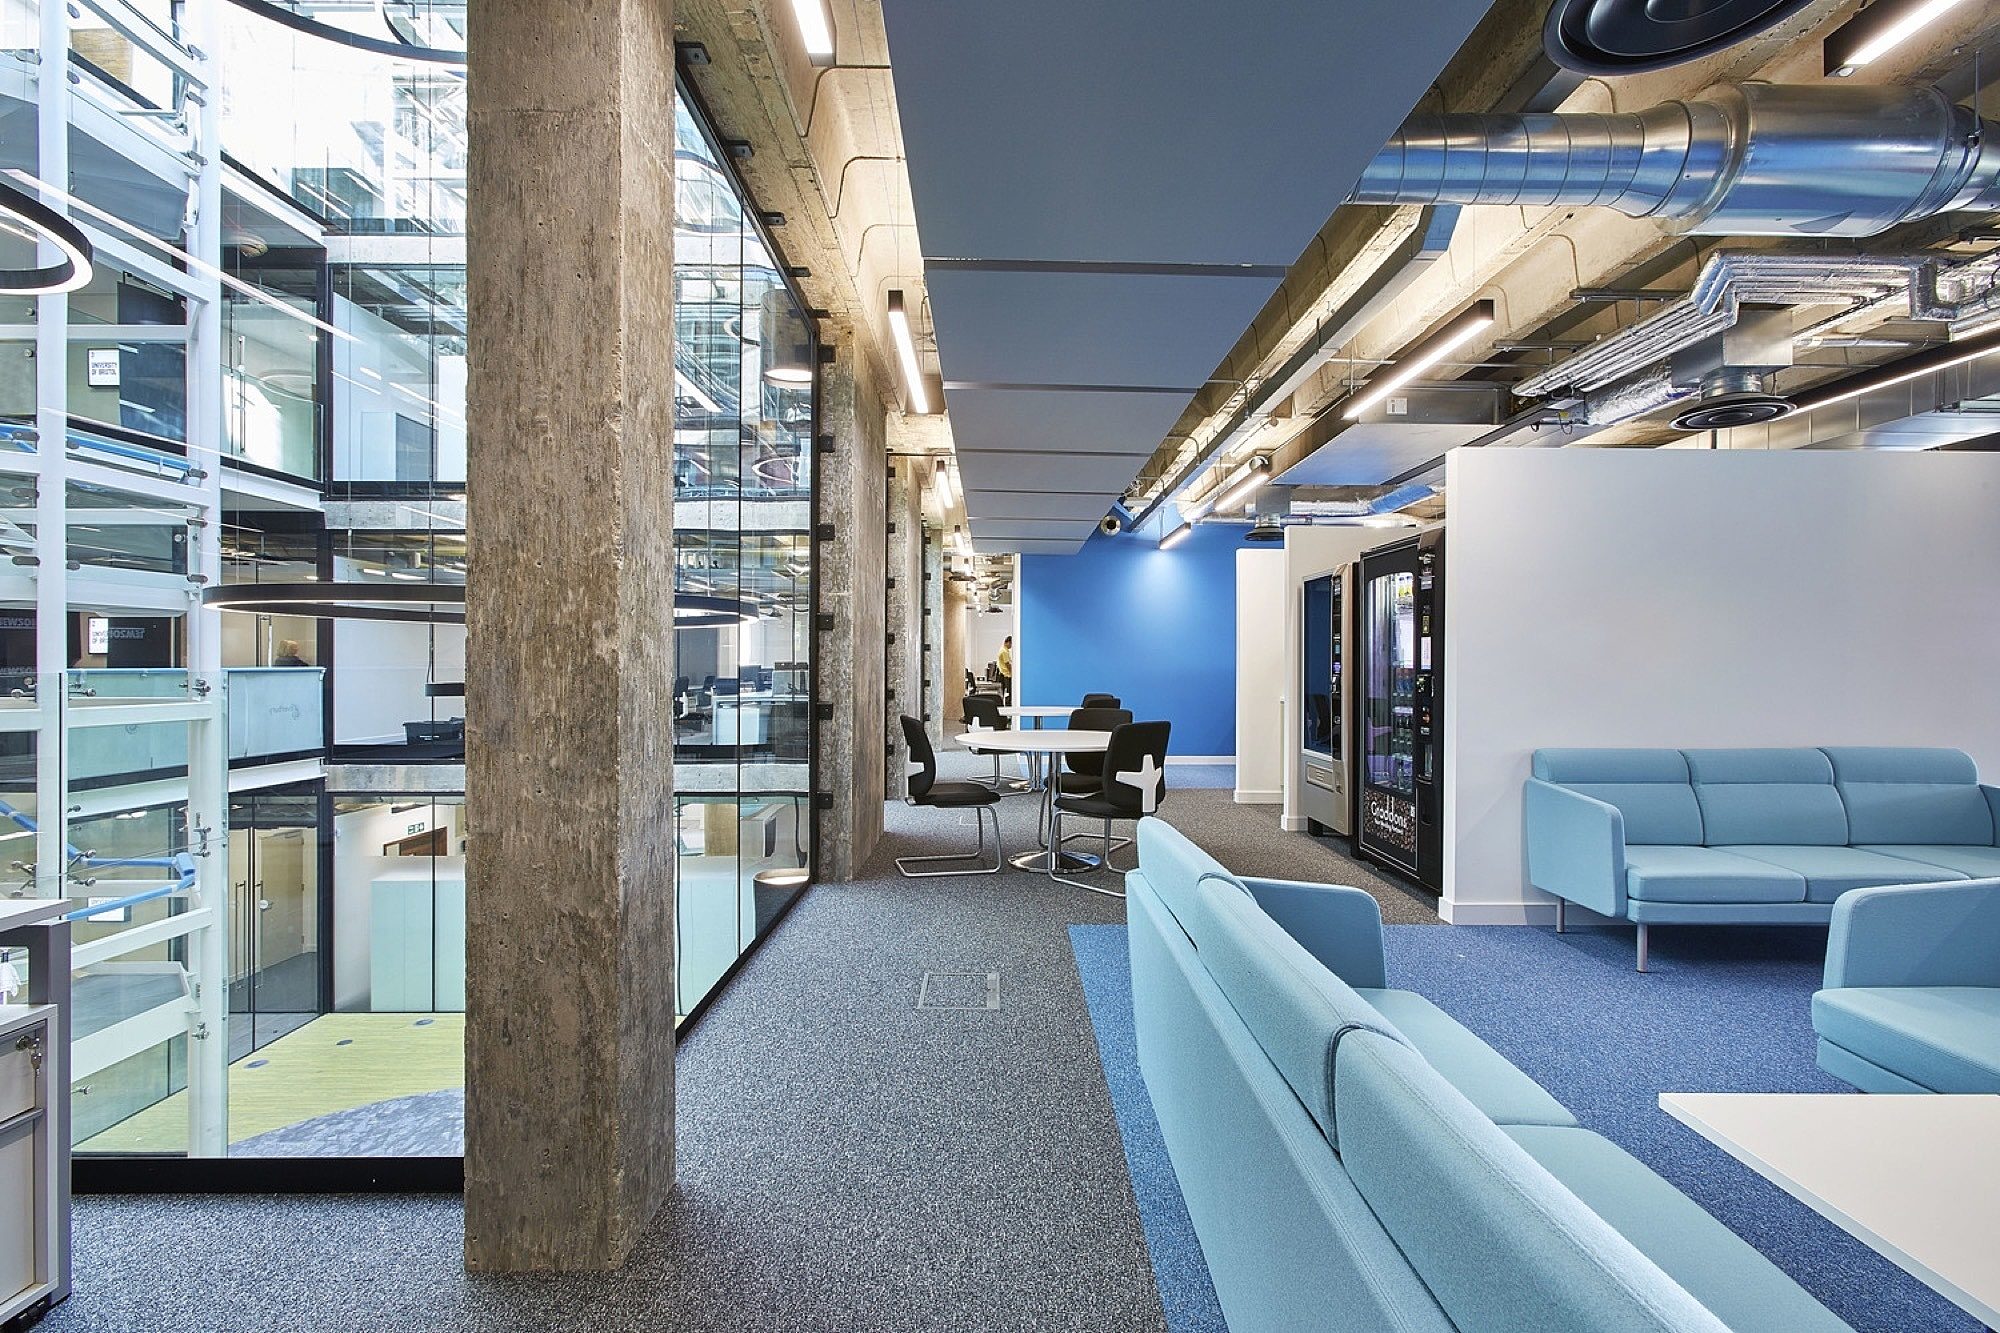 University Bristol office fit out with exposed services